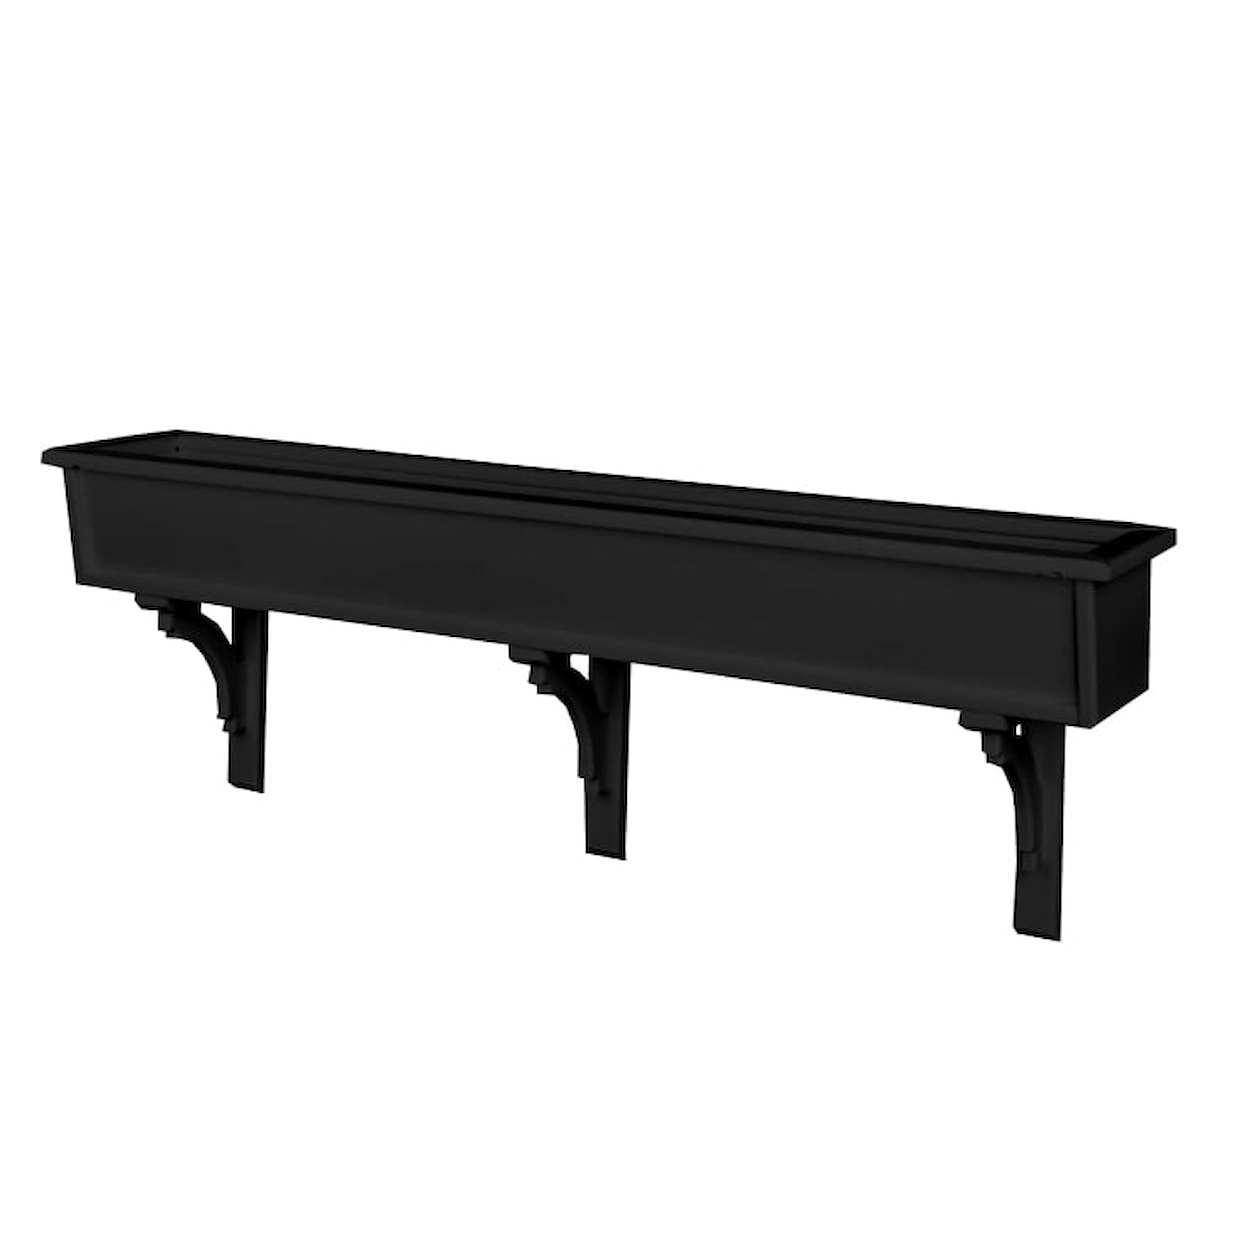 PatioKraft Planters and Benches 48" Window Box